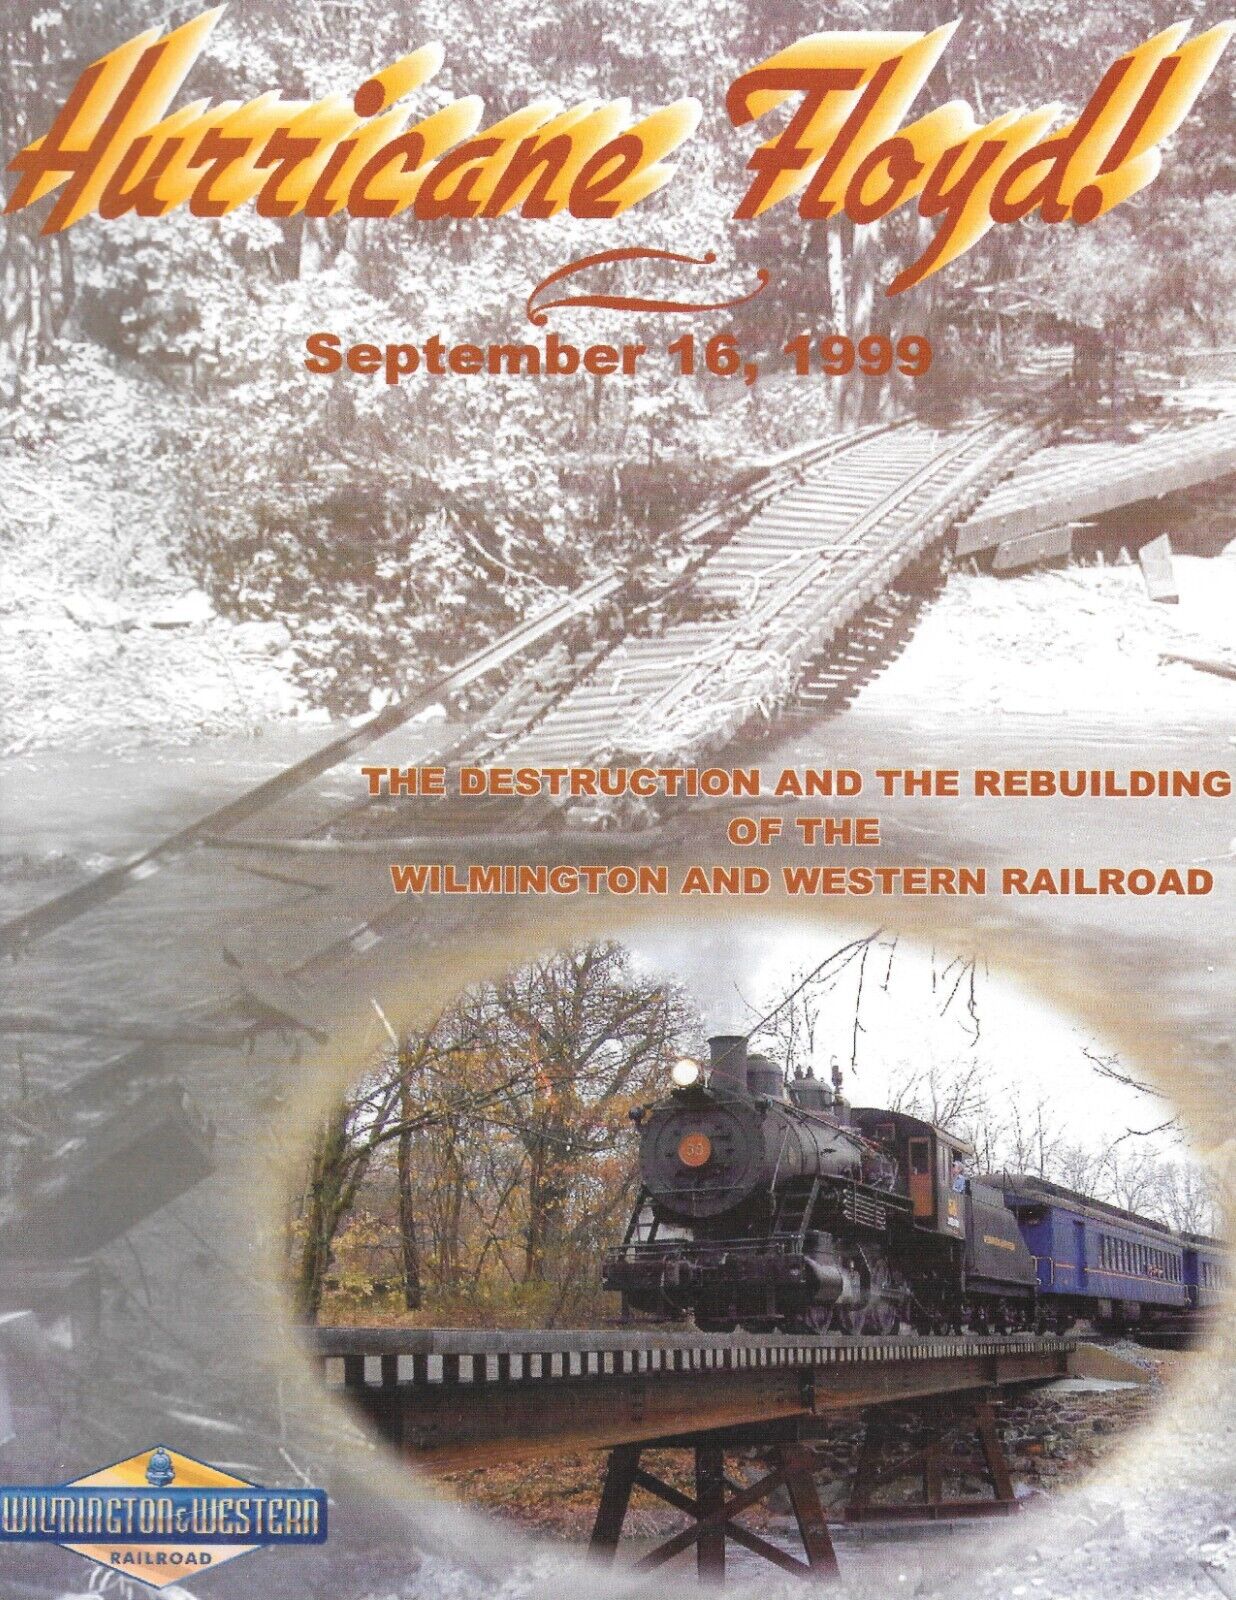 Hurricane Floyd: Rebuilding of the Wilmington and Western Railroad - NEW